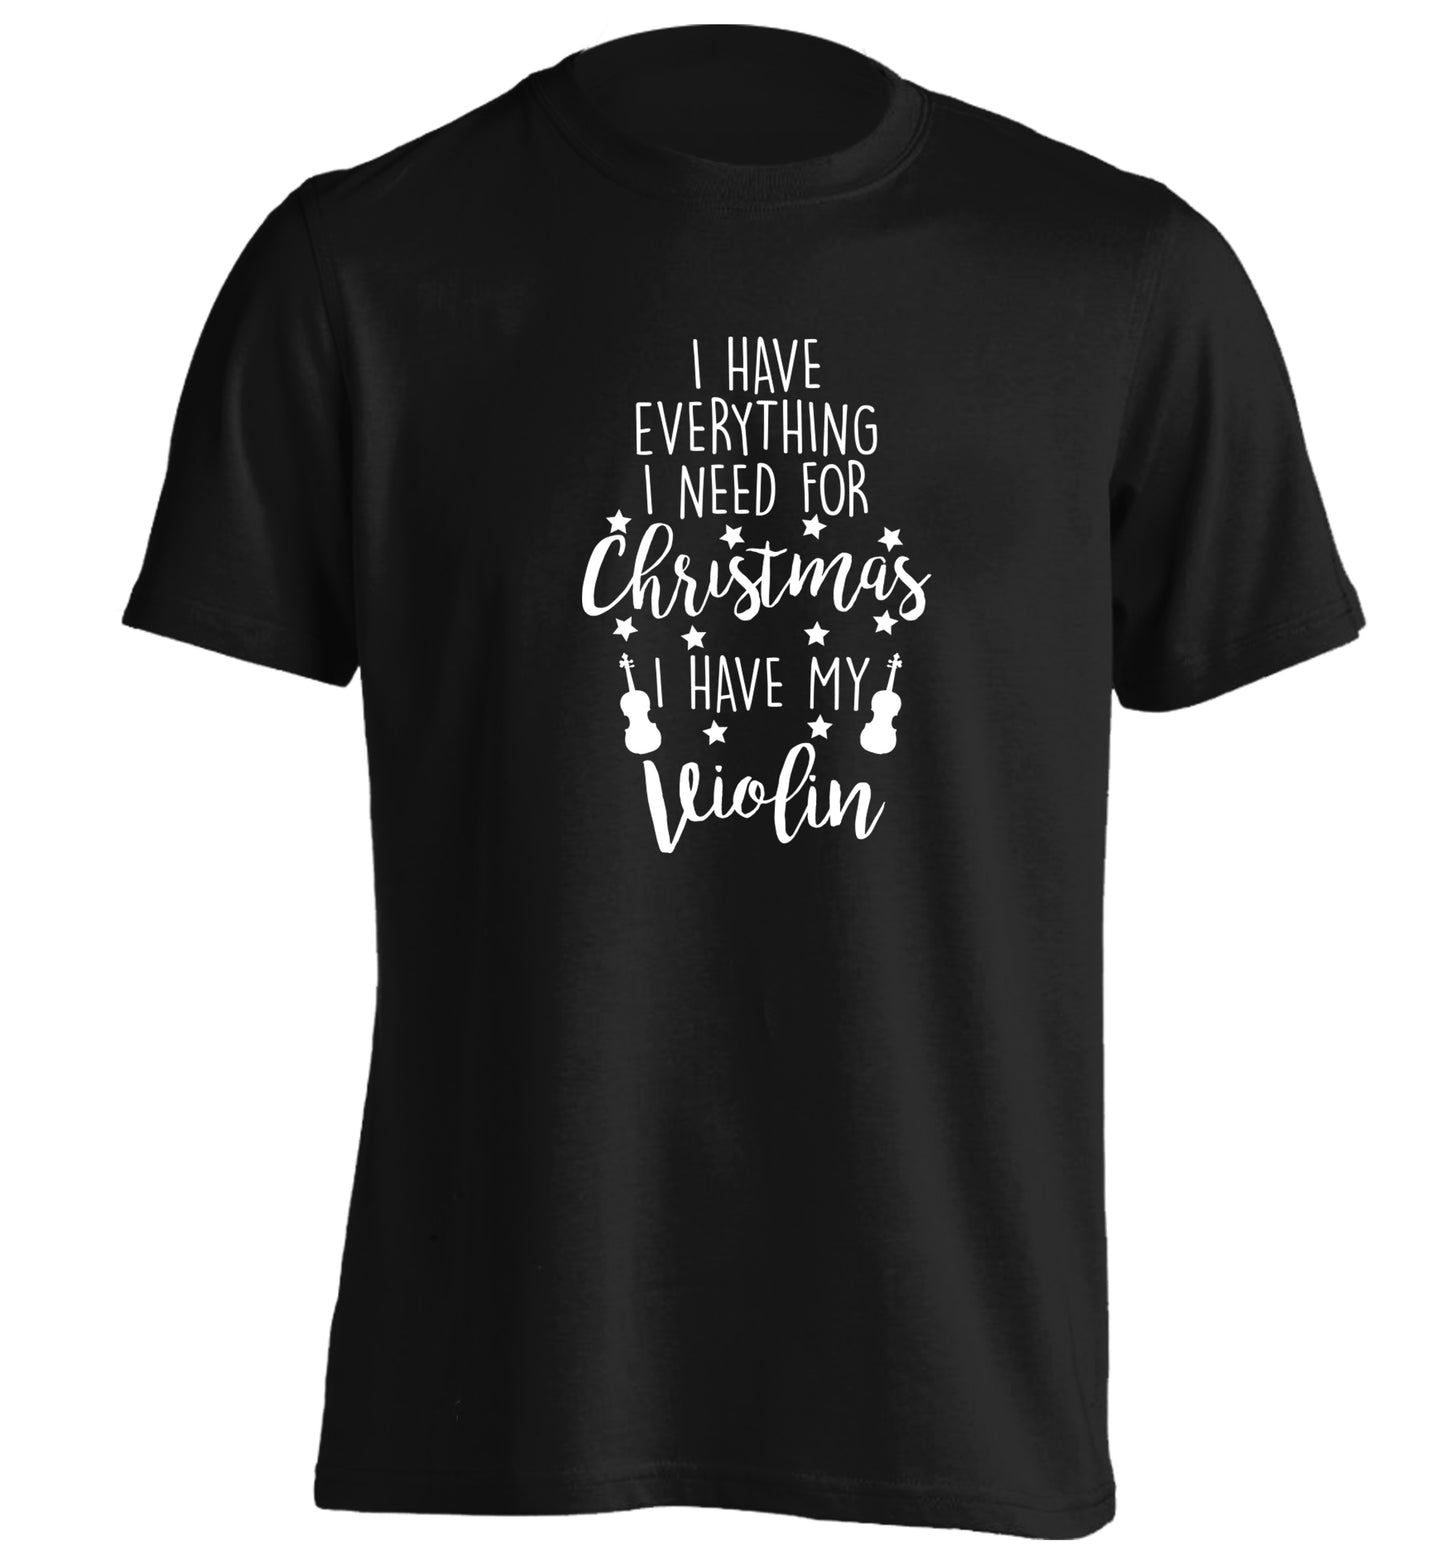 I have everything I need for Christmas I have my violin adults unisex black Tshirt 2XL